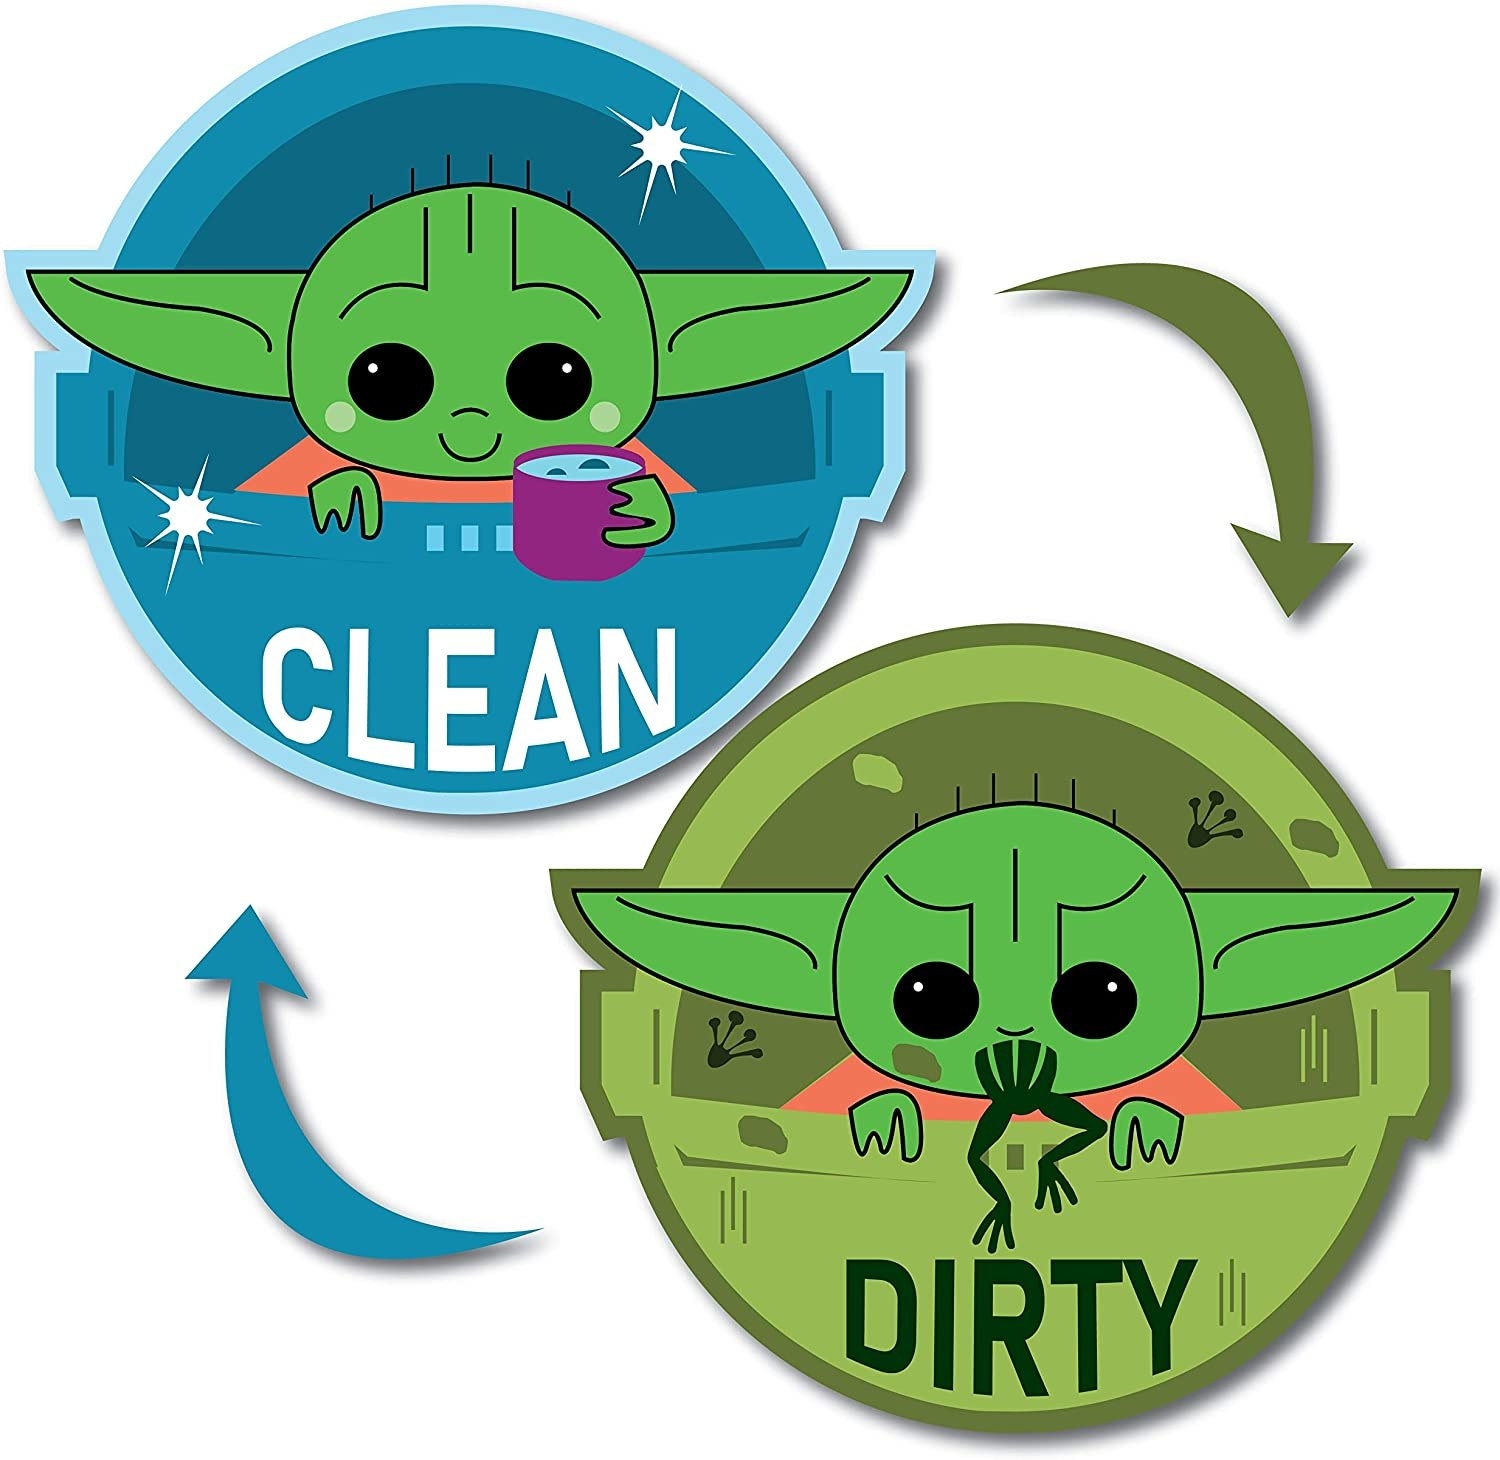 dishwasher magnets with cartoons of Baby Yoda on them